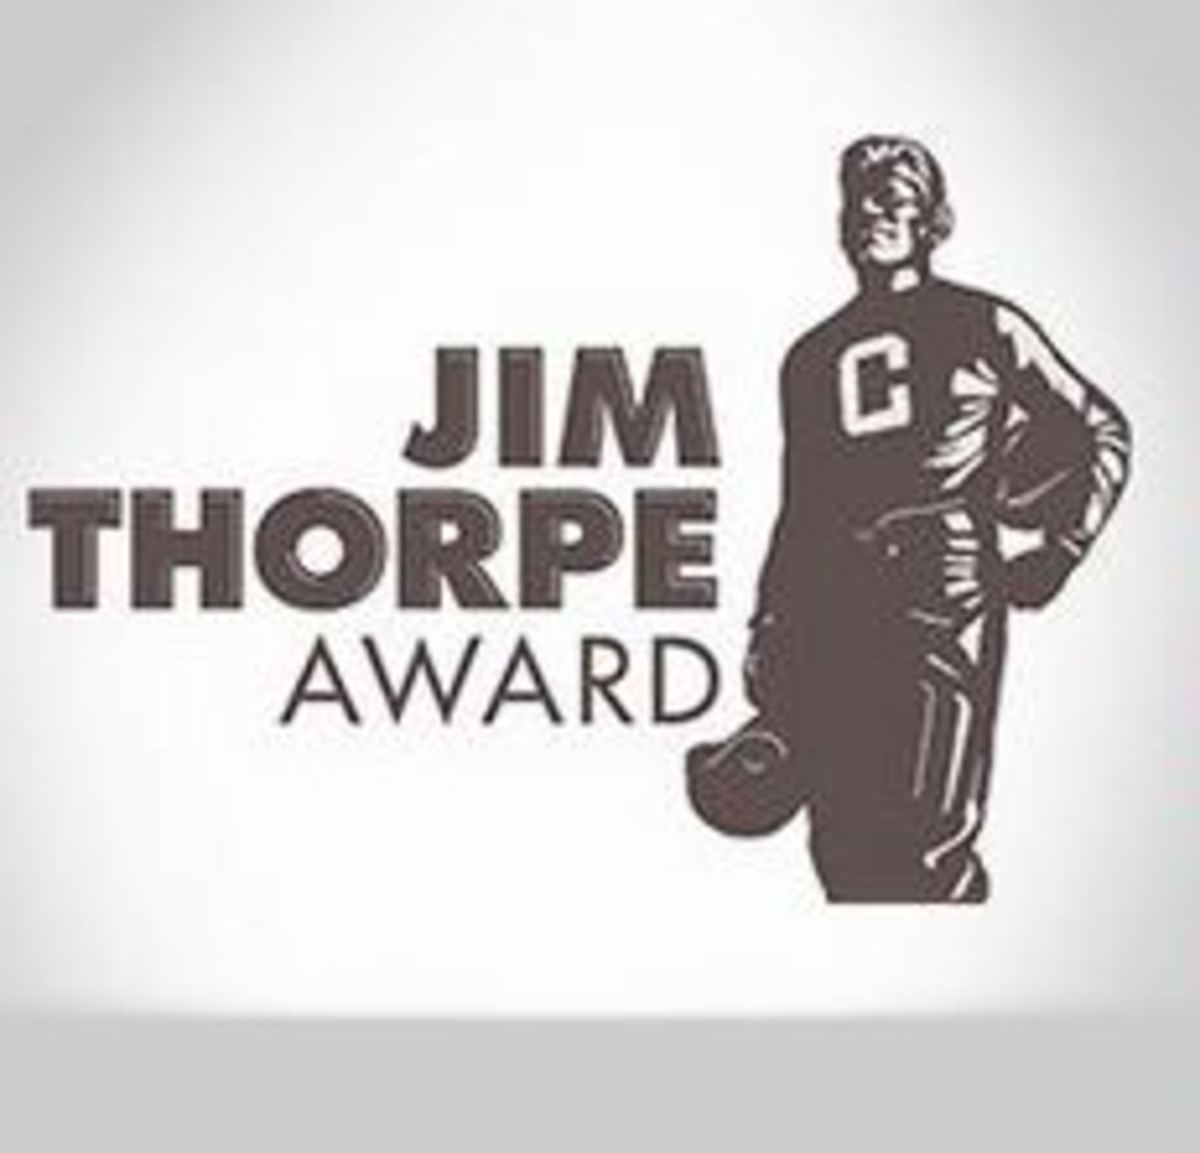 Promotion for the Jim Thorpe Award.